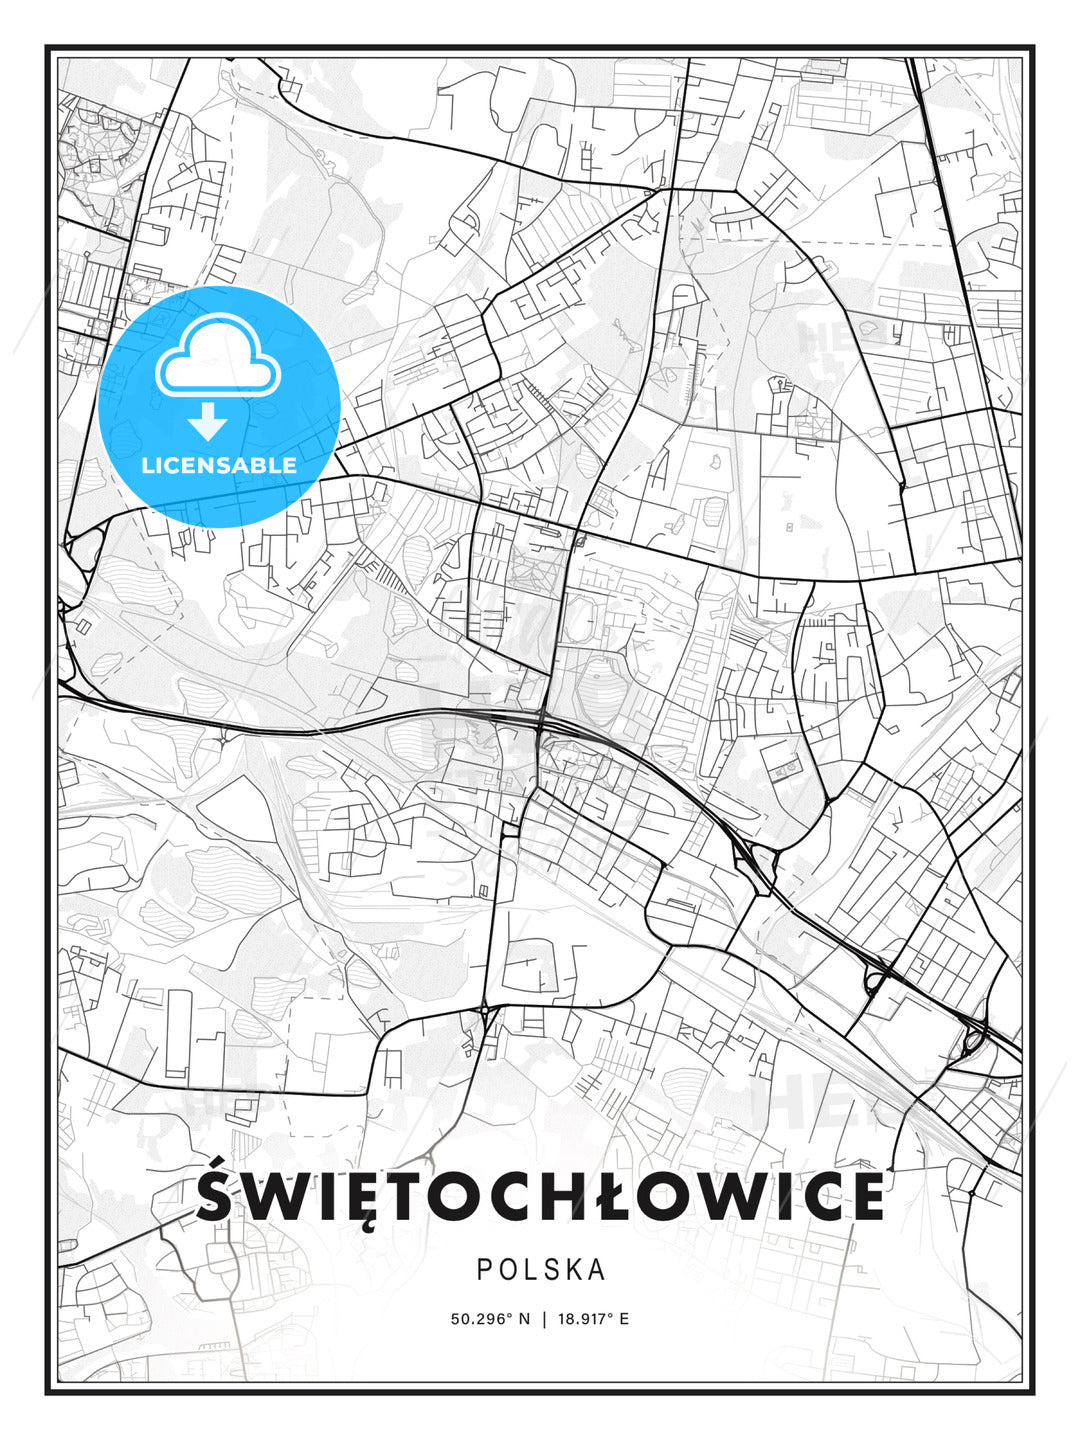 Świętochłowice, Poland, Modern Print Template in Various Formats - HEBSTREITS Sketches